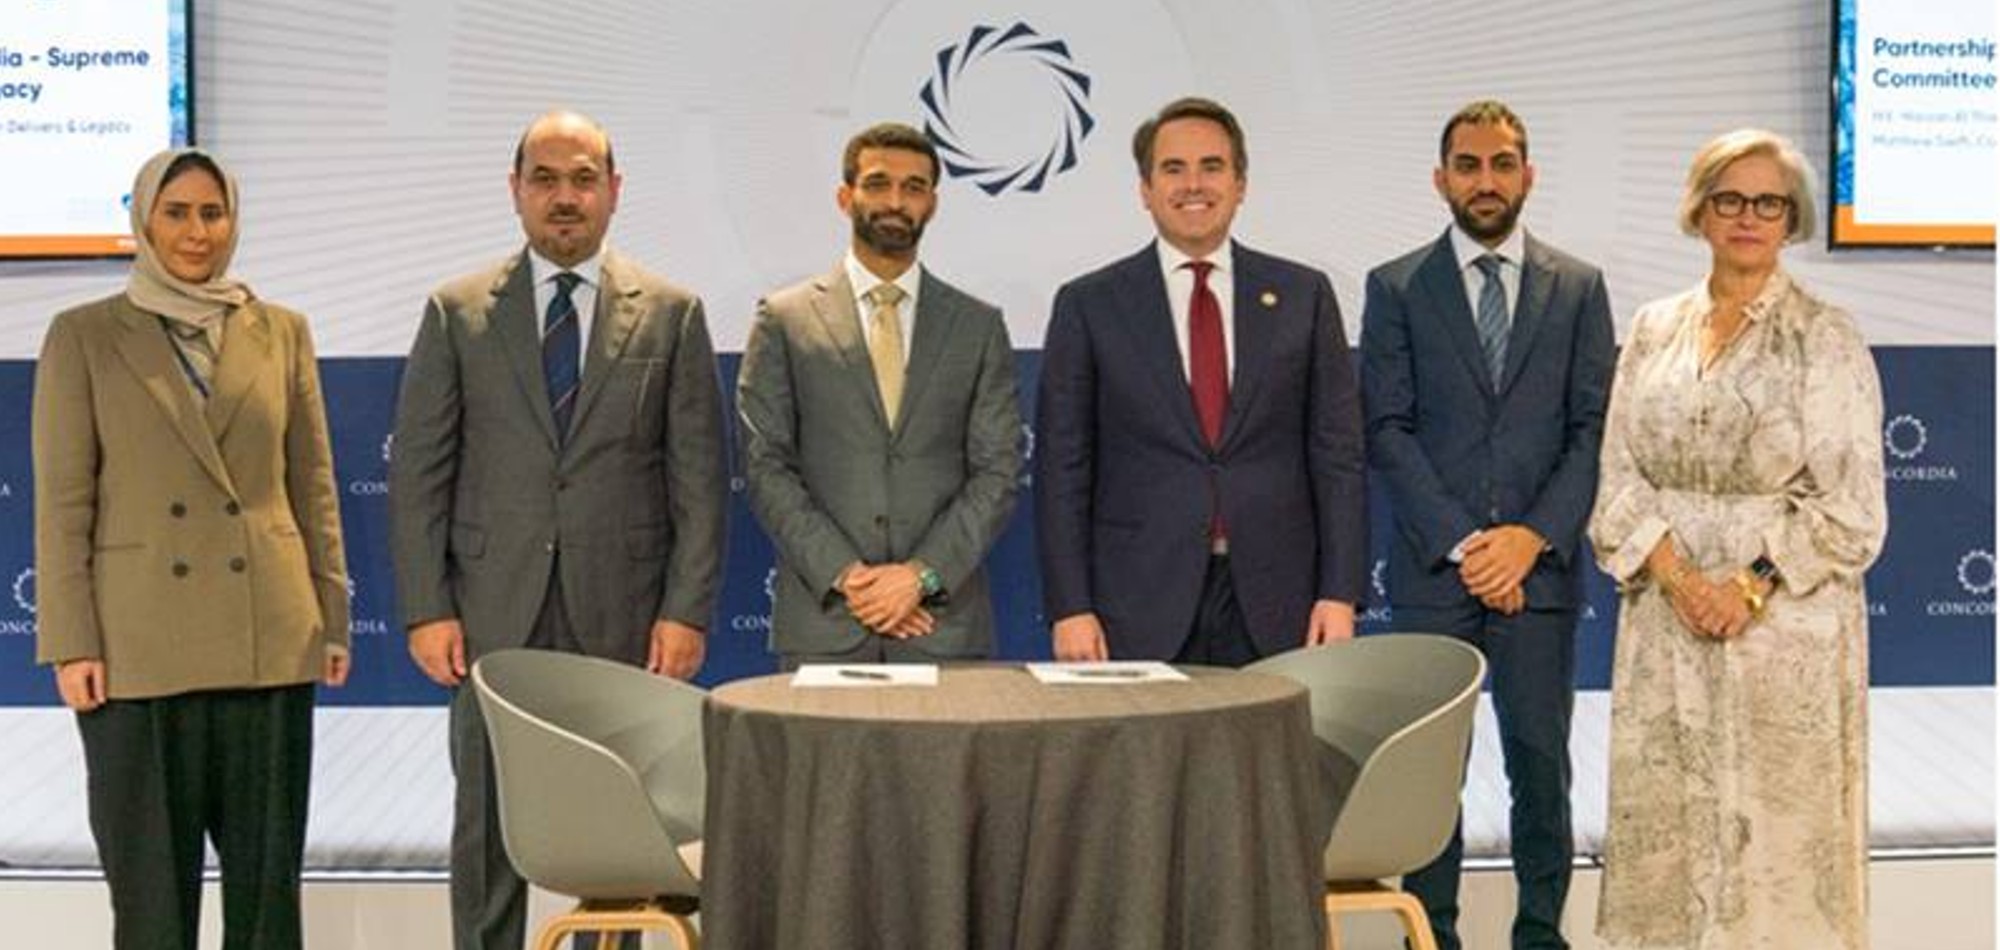 SC Signs MoU with Concordia to Raise Awareness of Qatar 2022 Legacy Projects